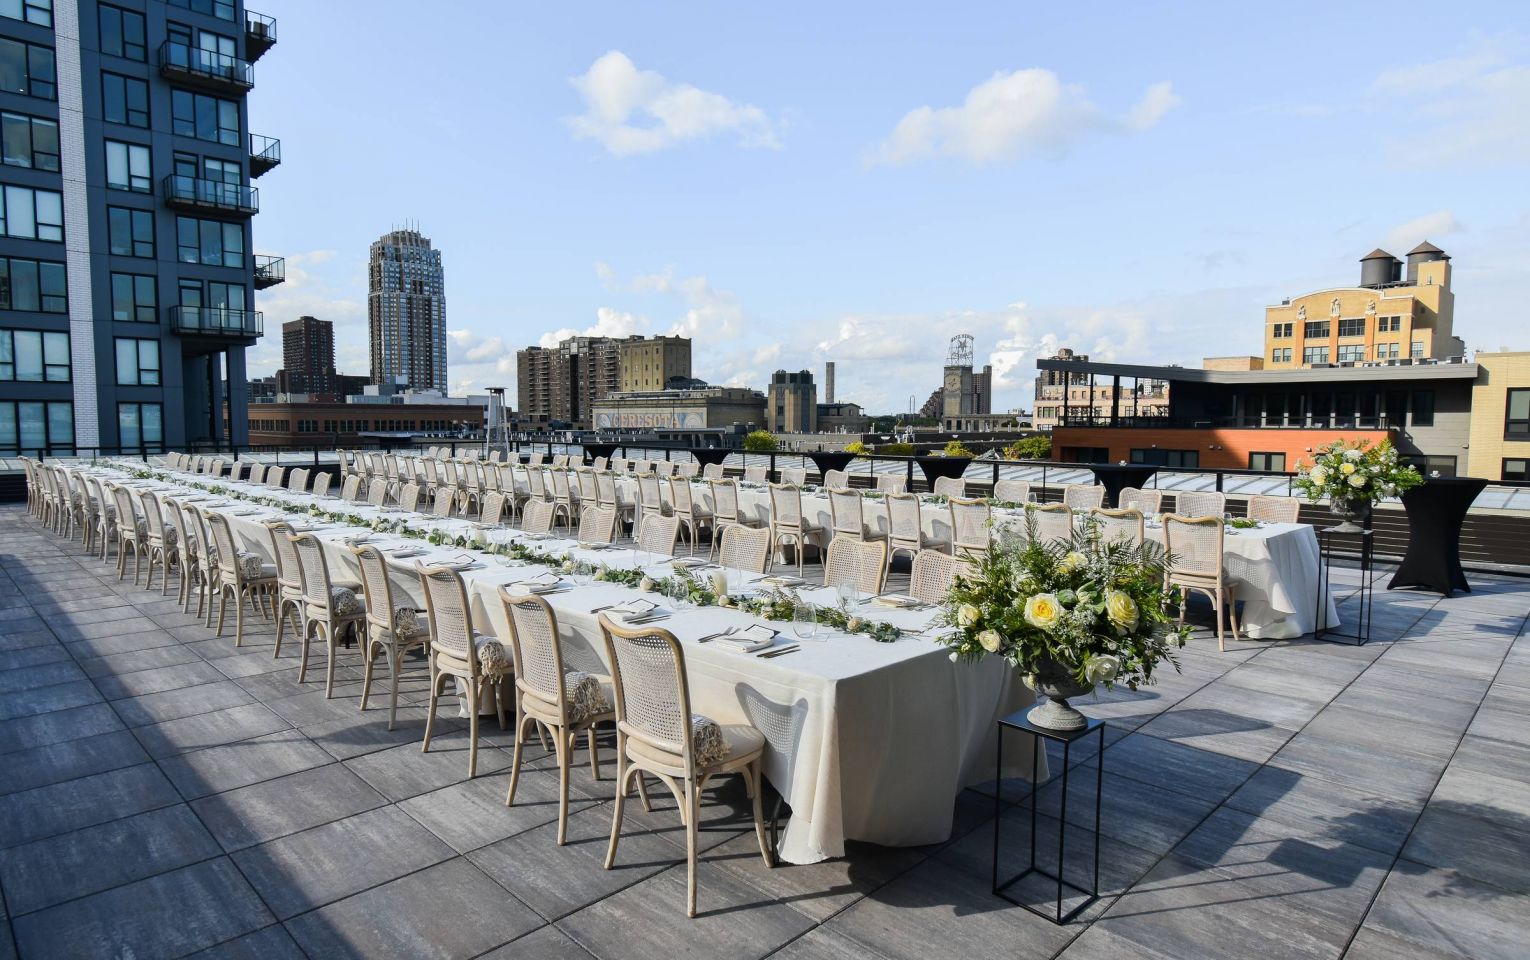 The rooftop of JI Case presents an arranged dining area for an event, featuring elegant table settings and panoramic city views.